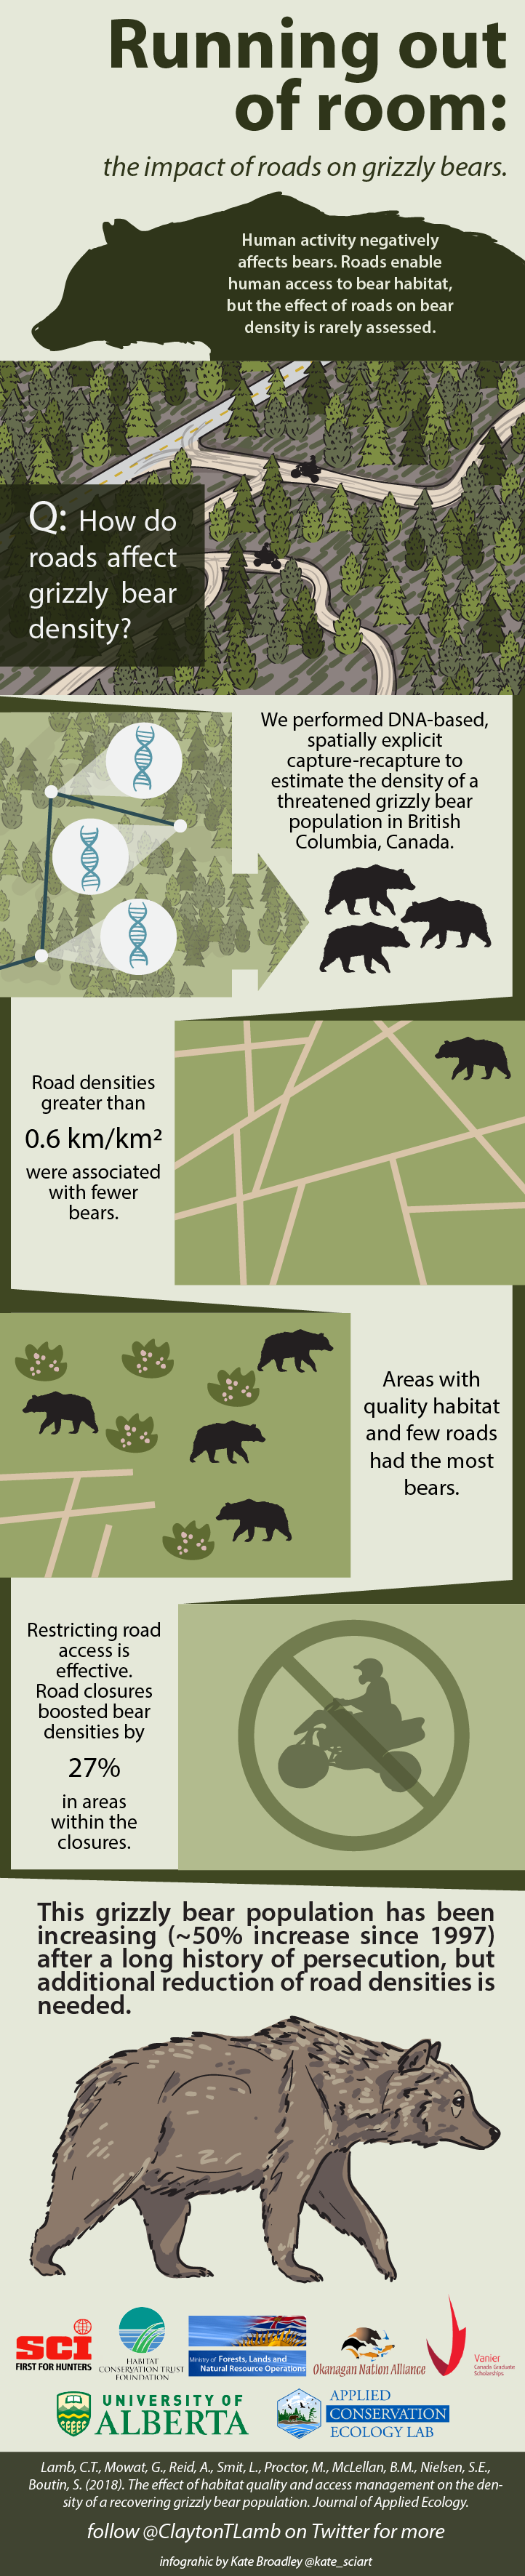 Running out of room: the impact of roads on grizzly bears